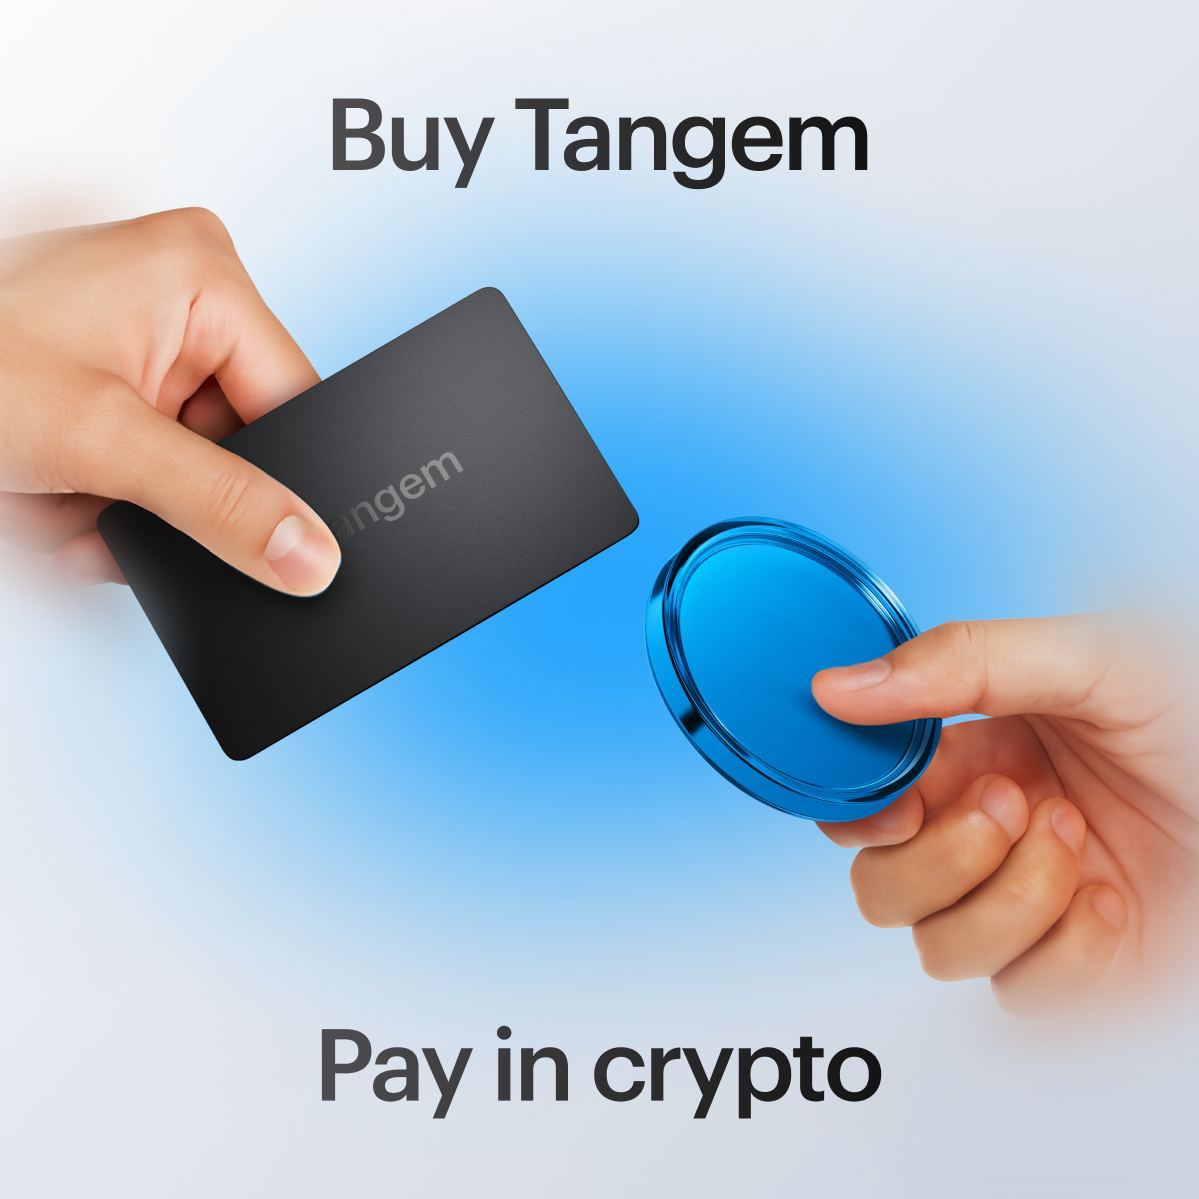 Buy Tangem Wallet with crypto 🎉

We're thrilled to announce that we now support payment in selected cryptocurrencies including BTC, USDT, KAS, SOL, and SHIB.

💡You can now buy a crypto cold wallet with your crypto and securely store your assets in it. More details are in our